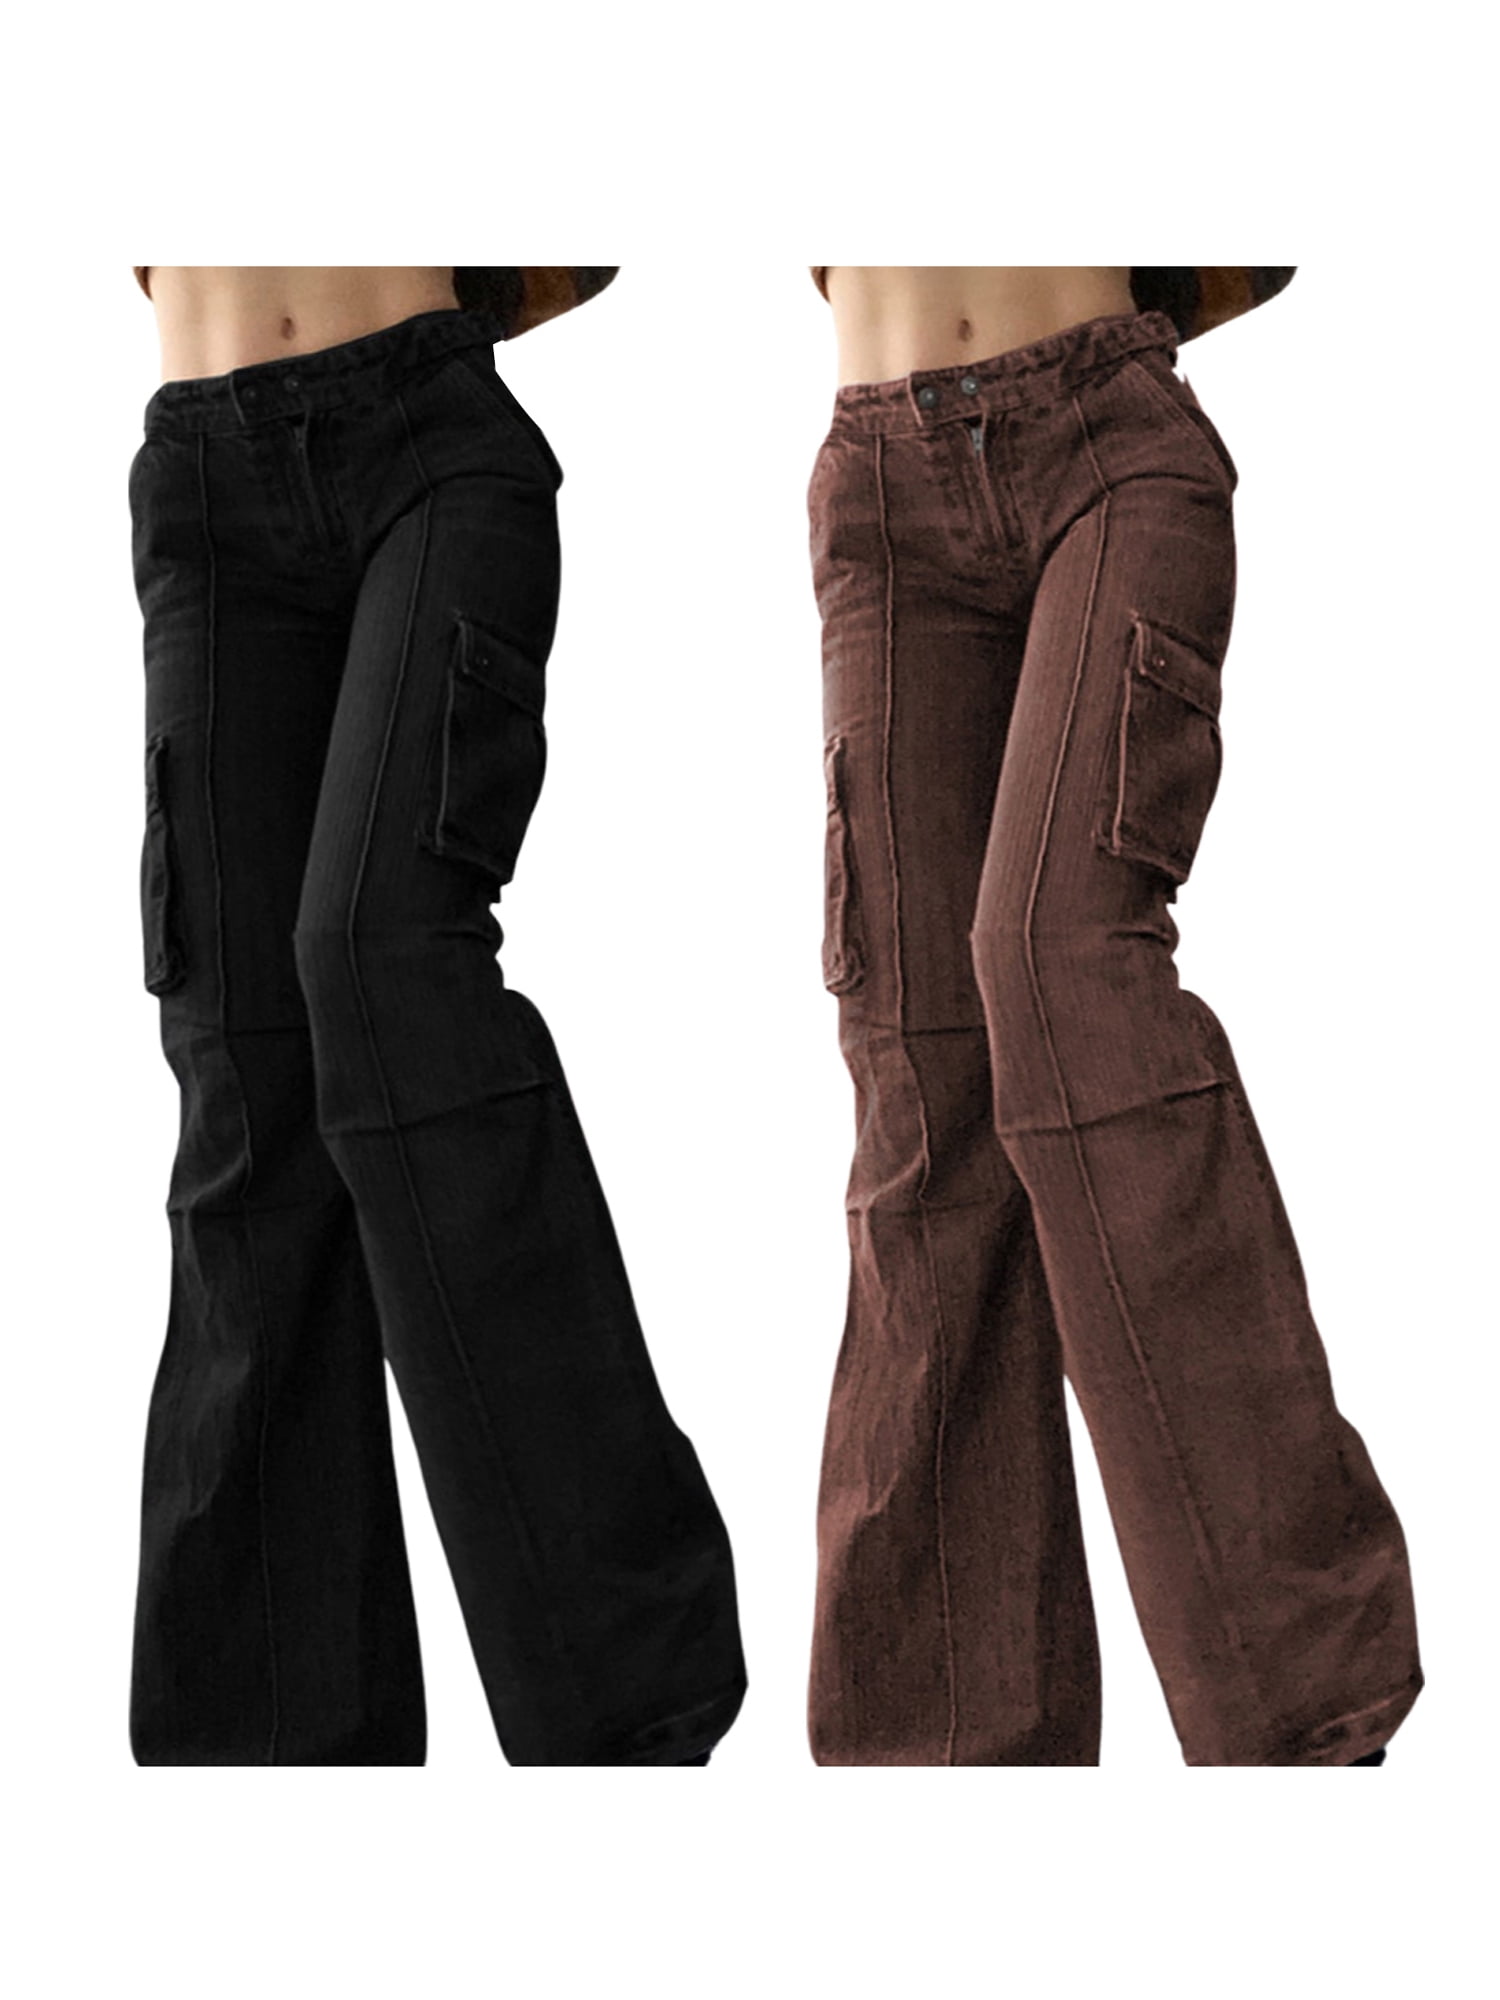 A Charcoal Black High-Waist, trumpet-cut Details Pant with Si